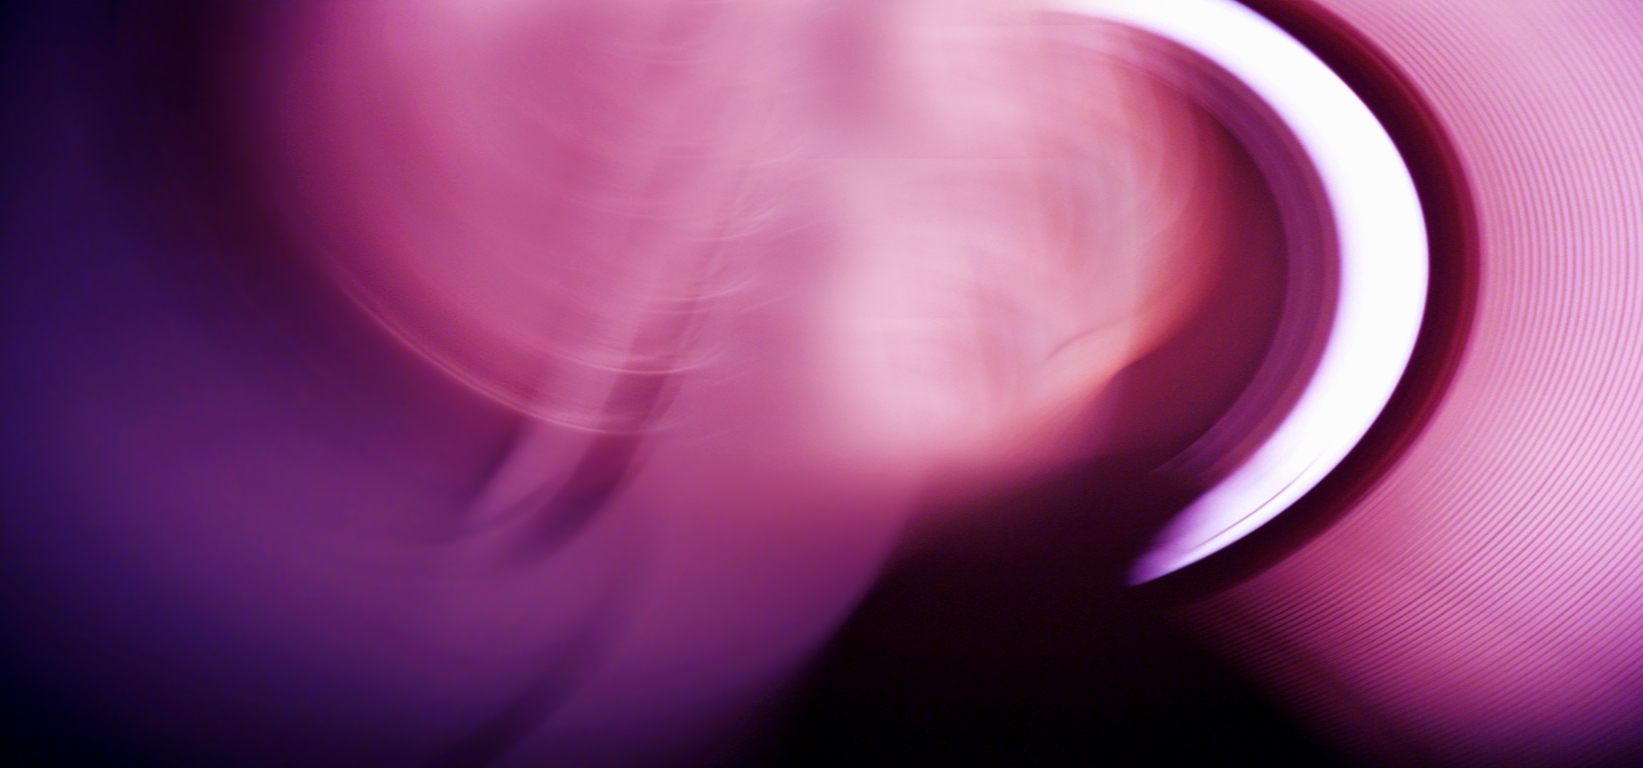 Abstract Photograph: 'Toccata and Fugue in Pink' by artist and photographer John Russell